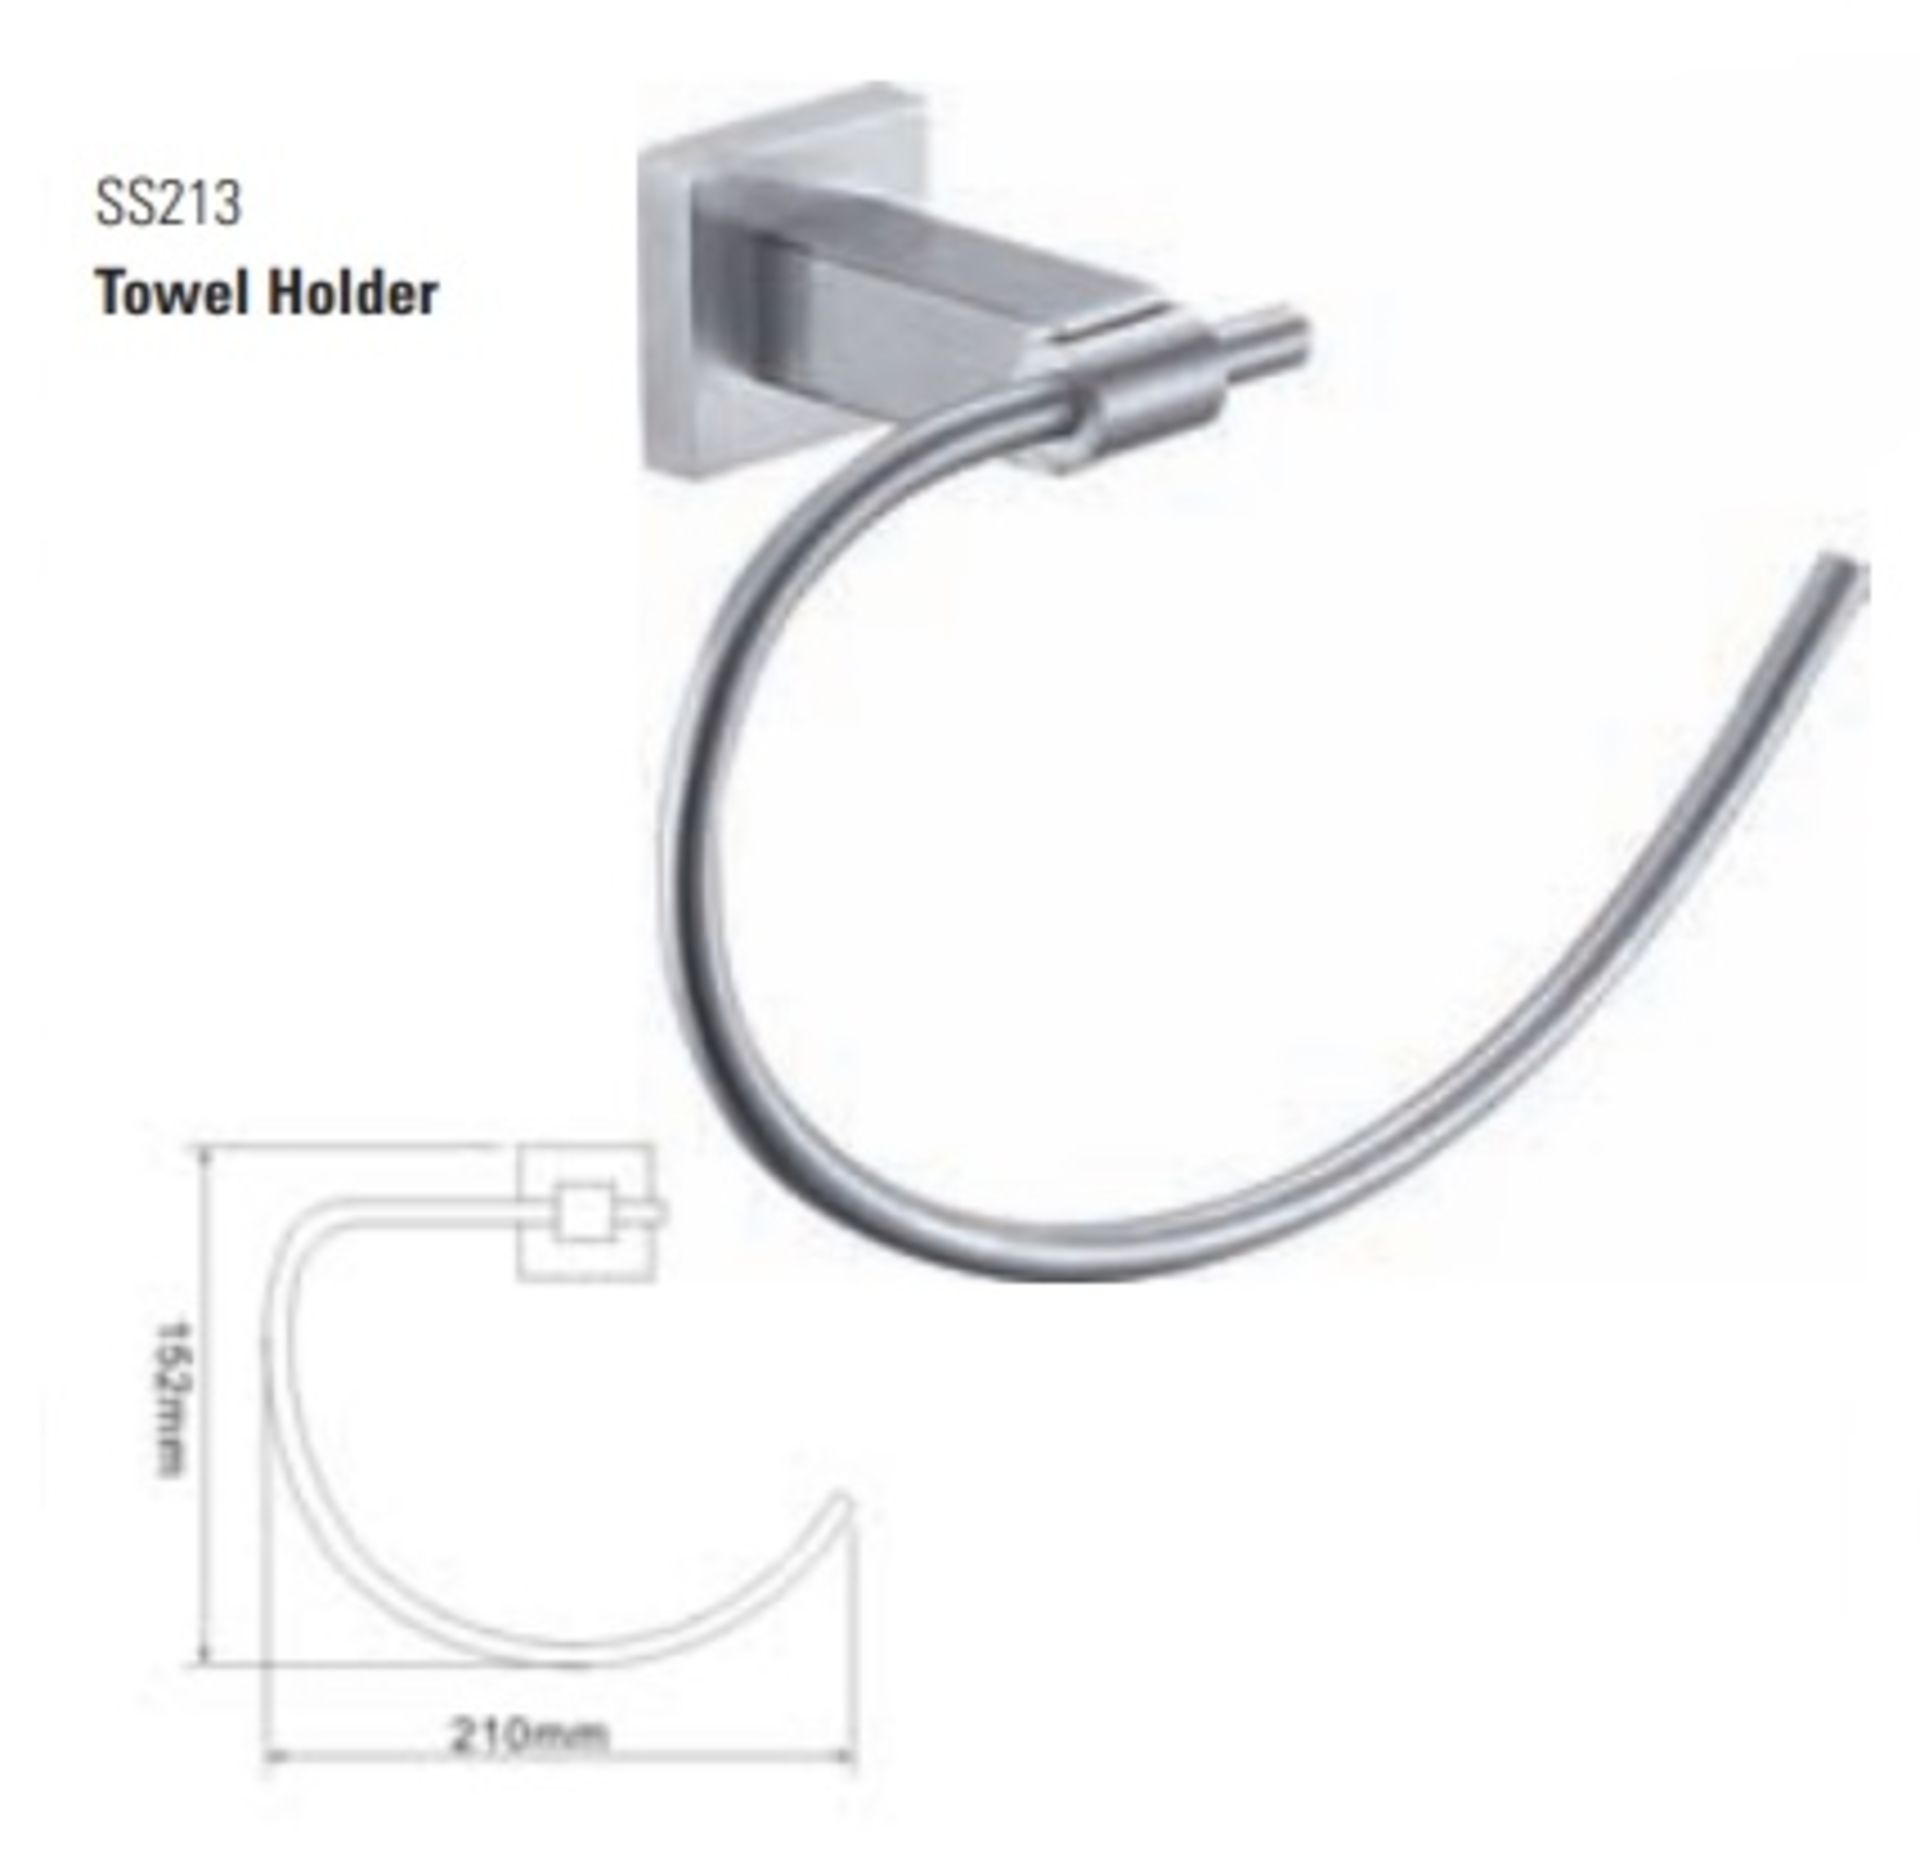 1 x Stonearth Towel Holder - Solid Stainless Steel Bathroom Accessory - Brand New & Boxed - RRP £ - Image 2 of 2